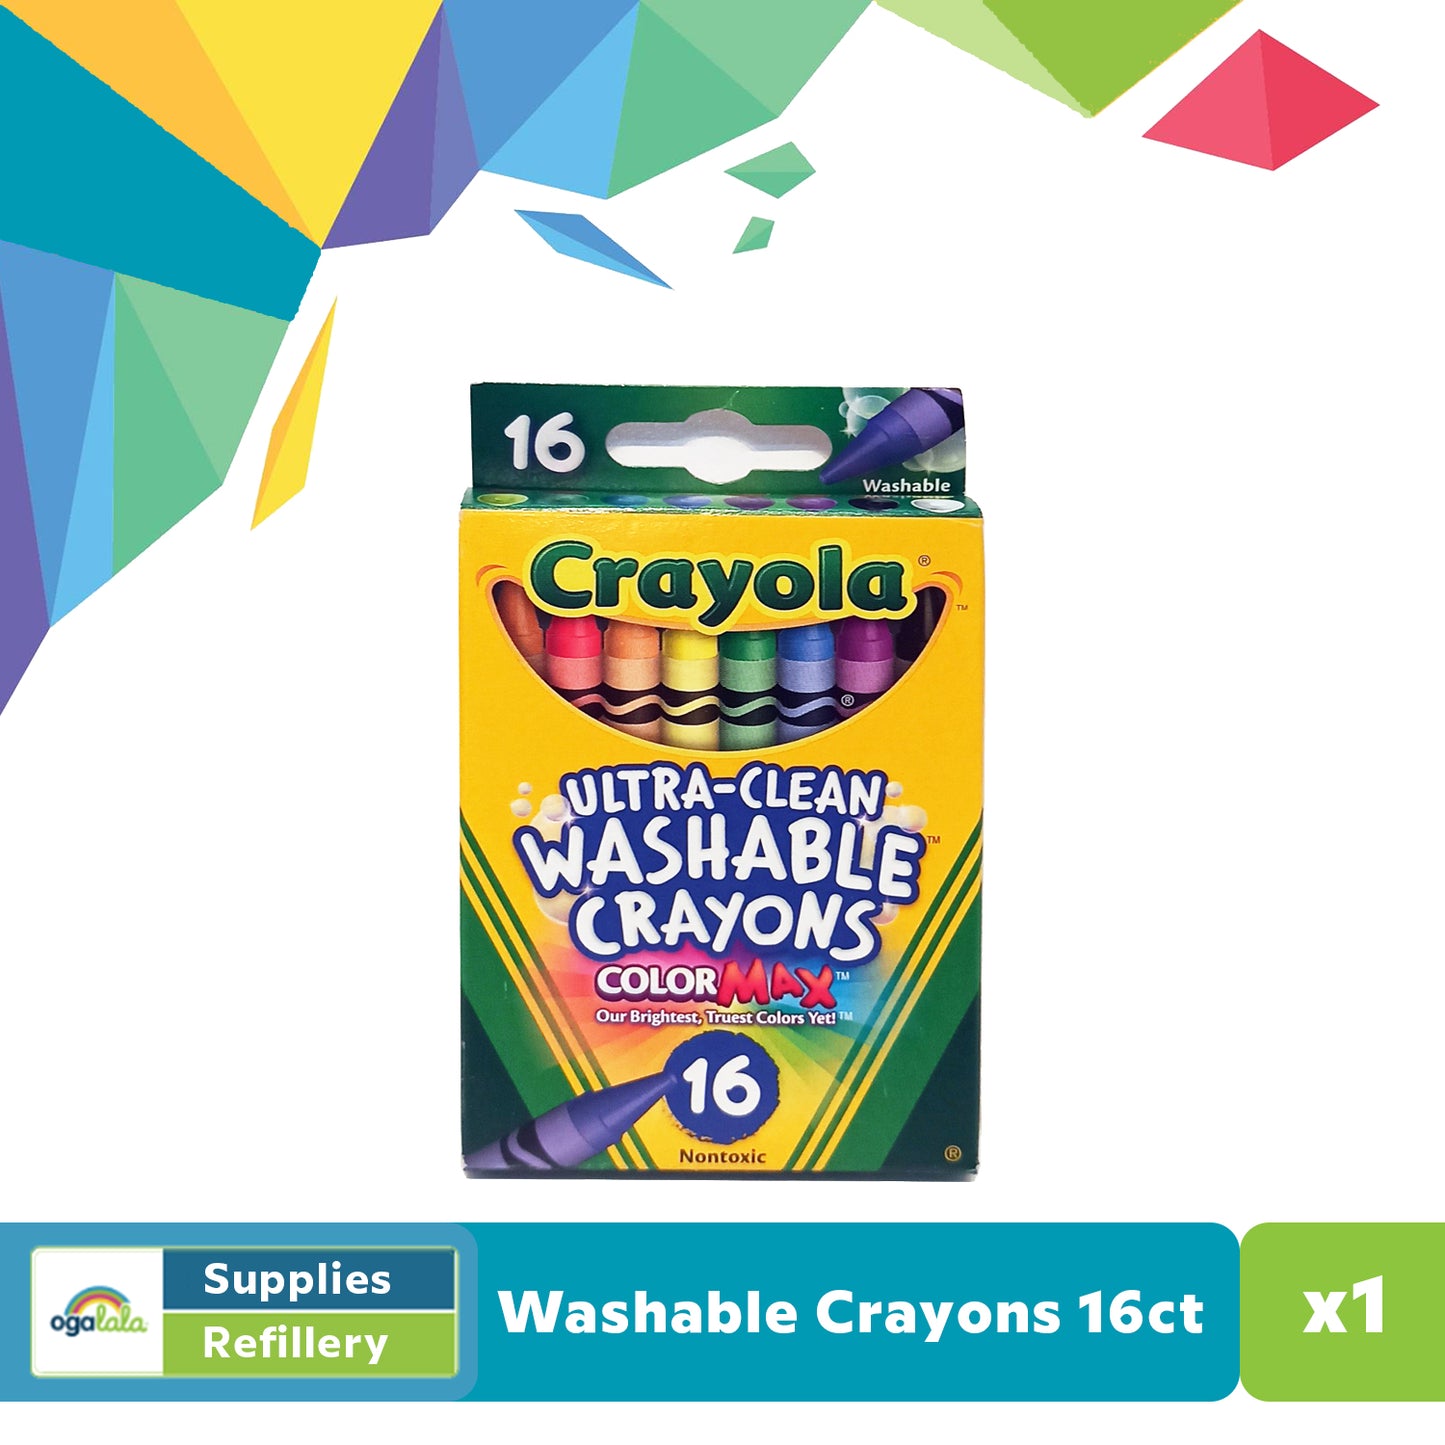 18ct WS Kids Paint + 10ct Supertips + 16ct WS Crayons